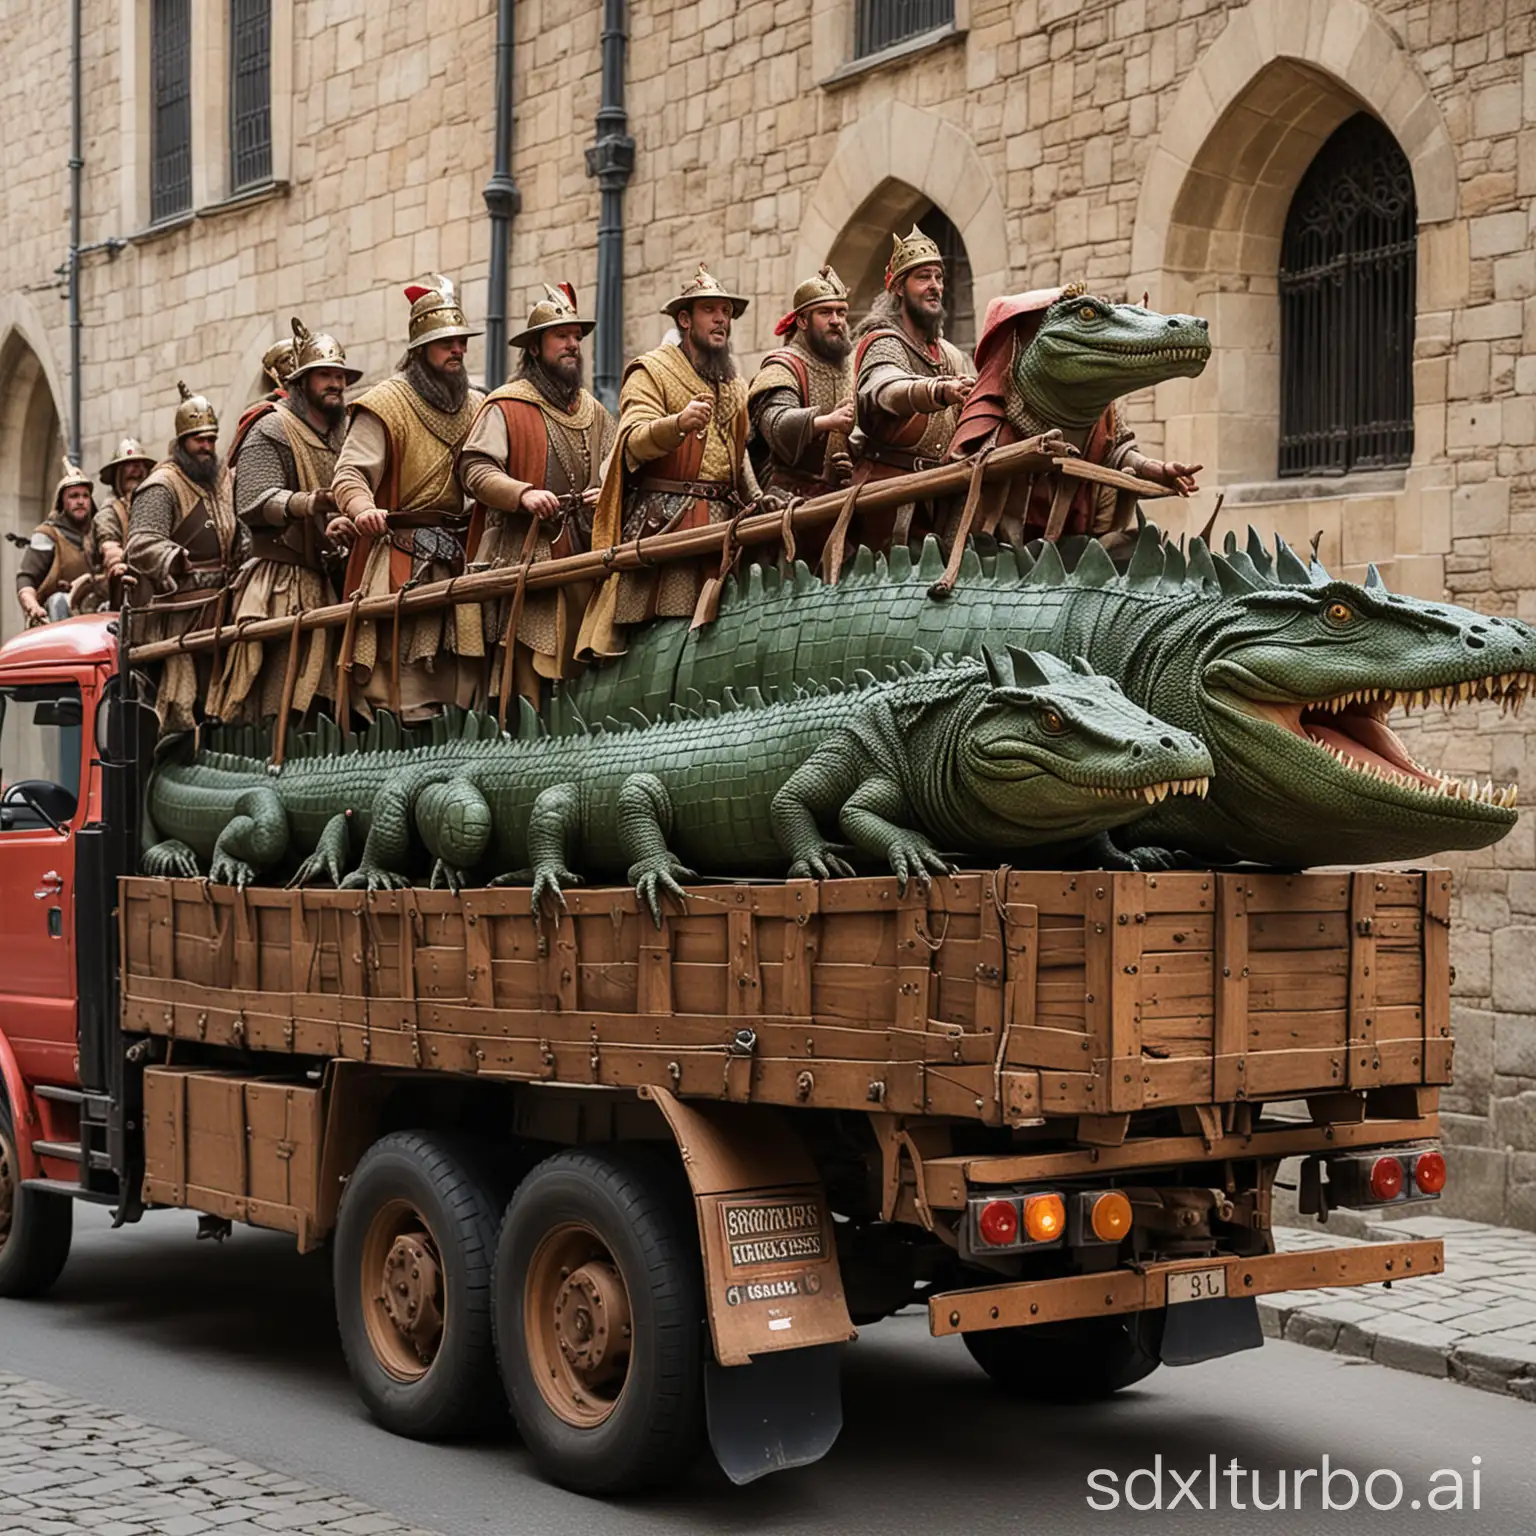 Medieval truck loaded with costumed crocodiles